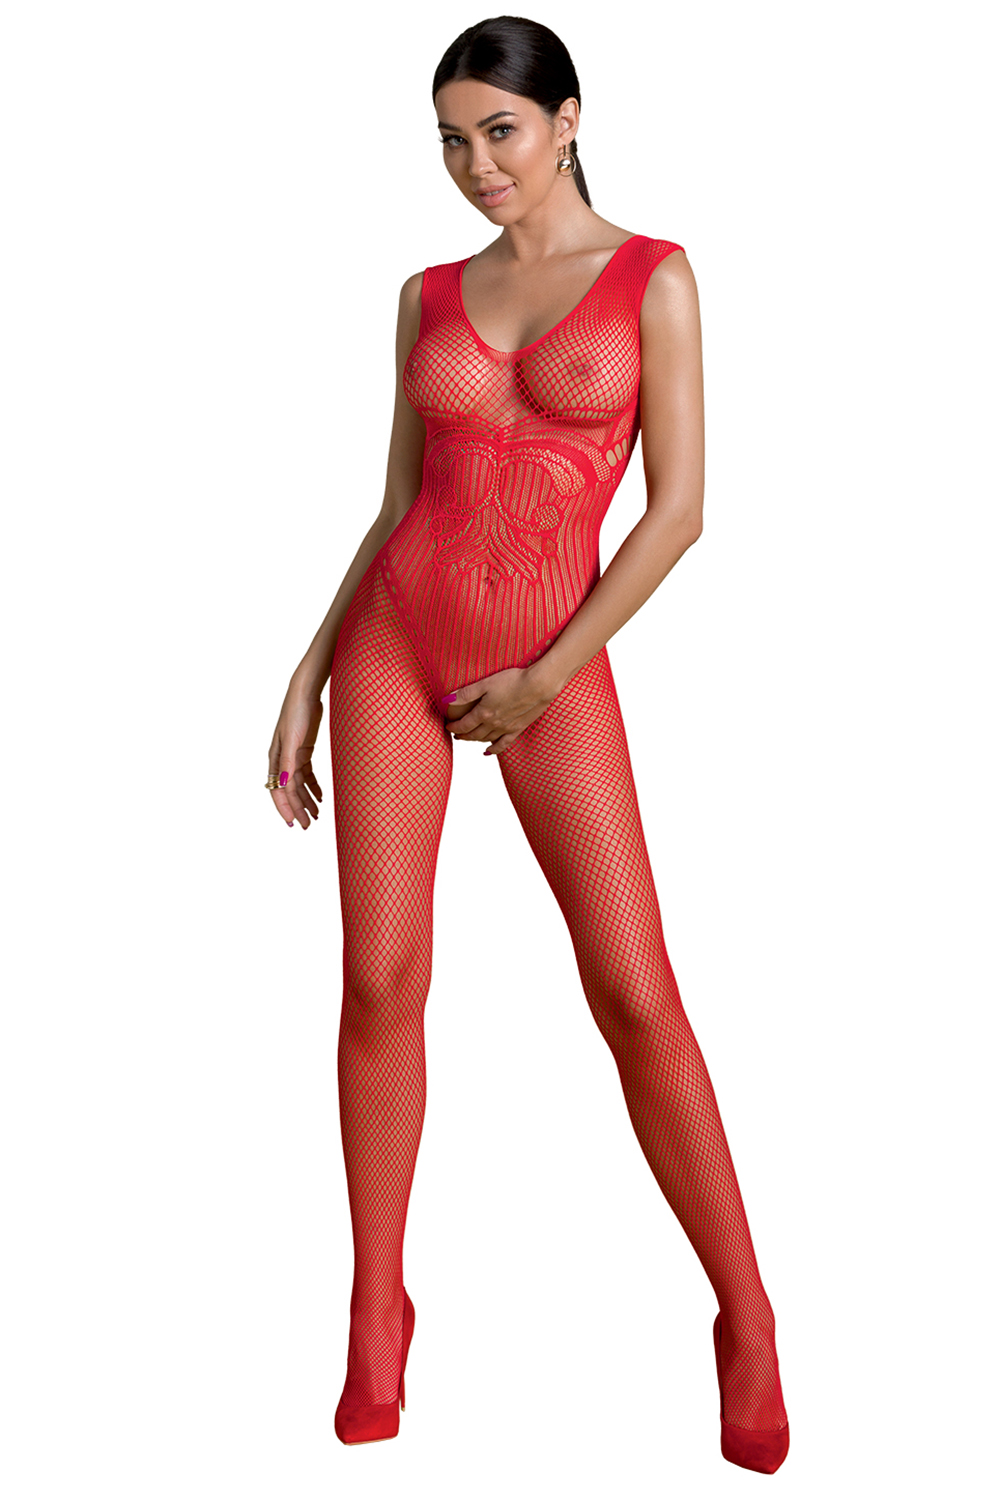 Passion ECO BS003 Body bodystocking, red